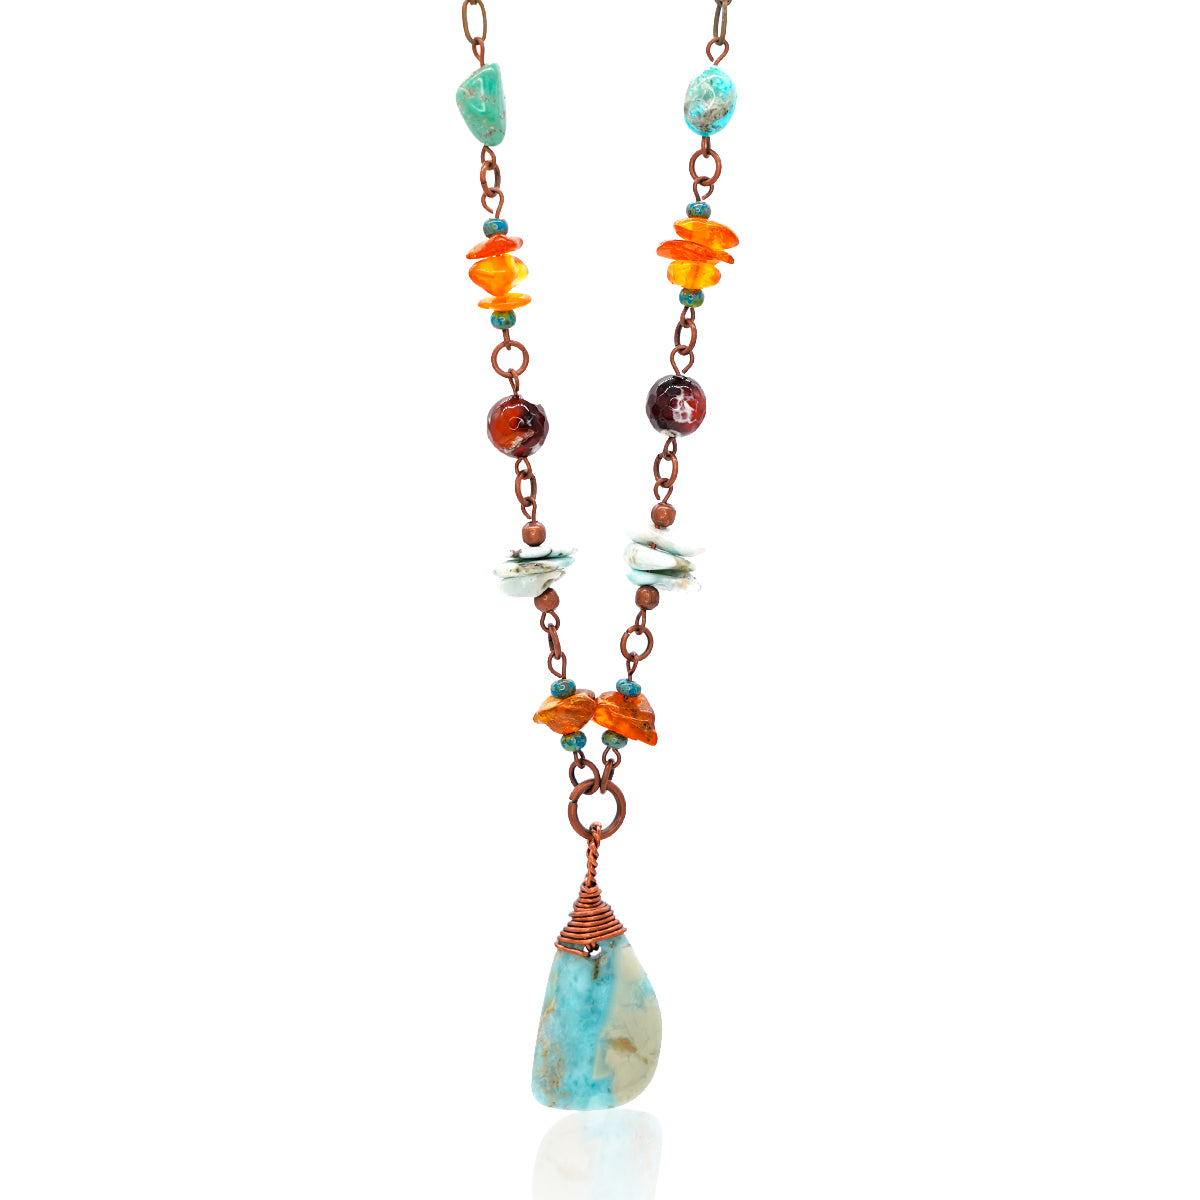 Copper Chain Necklace with Dominican Larimar, Turquoise, Agate, and Baltic Amber